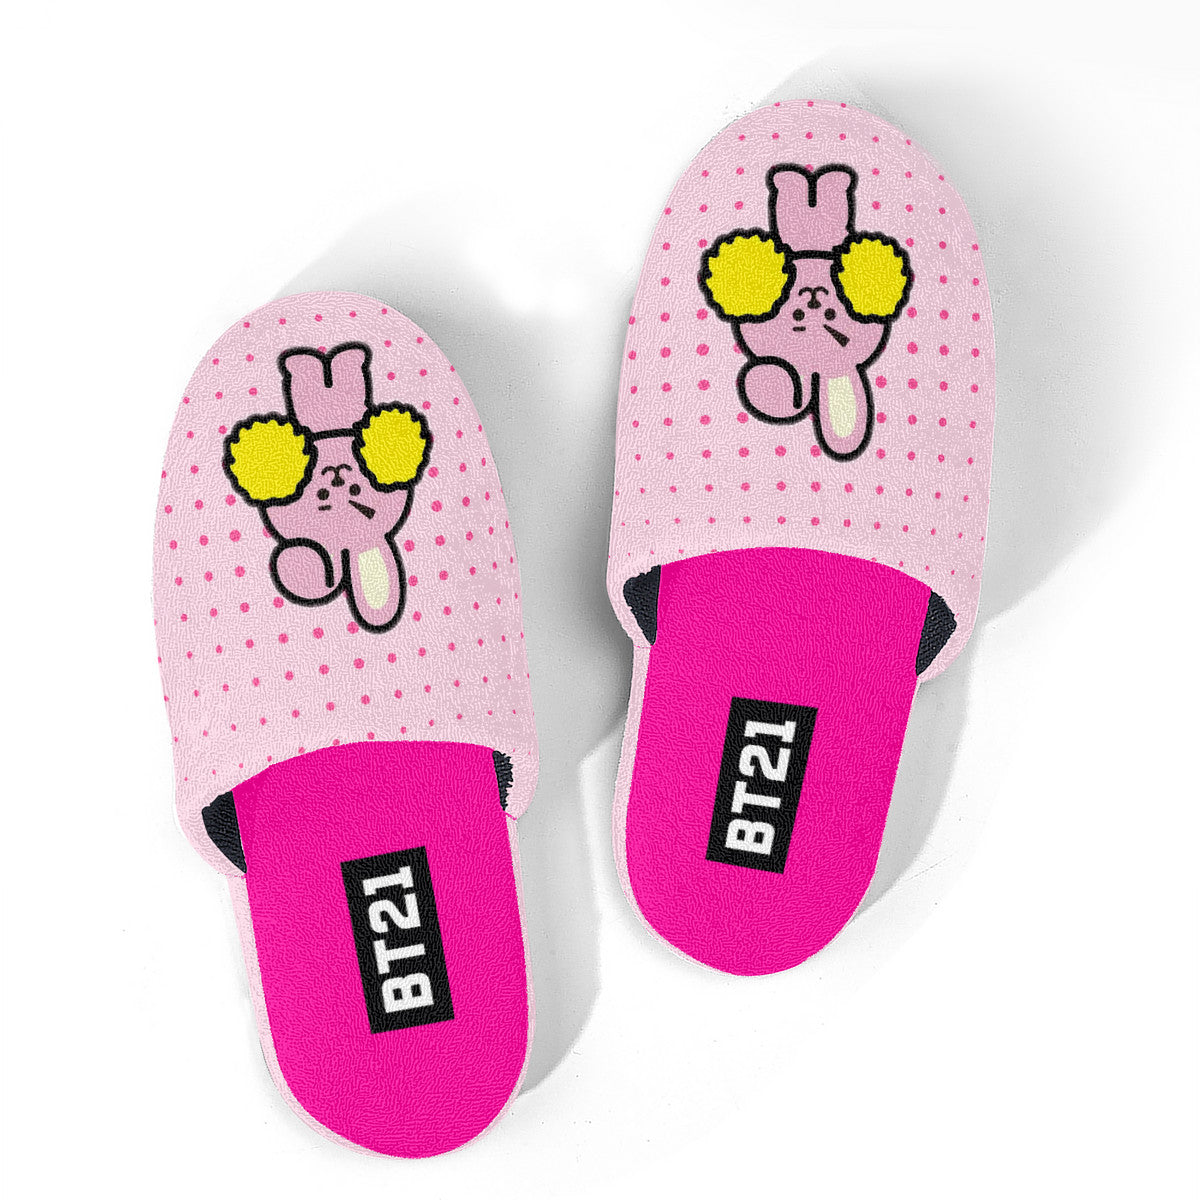 Cooky Slippers - BTS JUNGKOOK